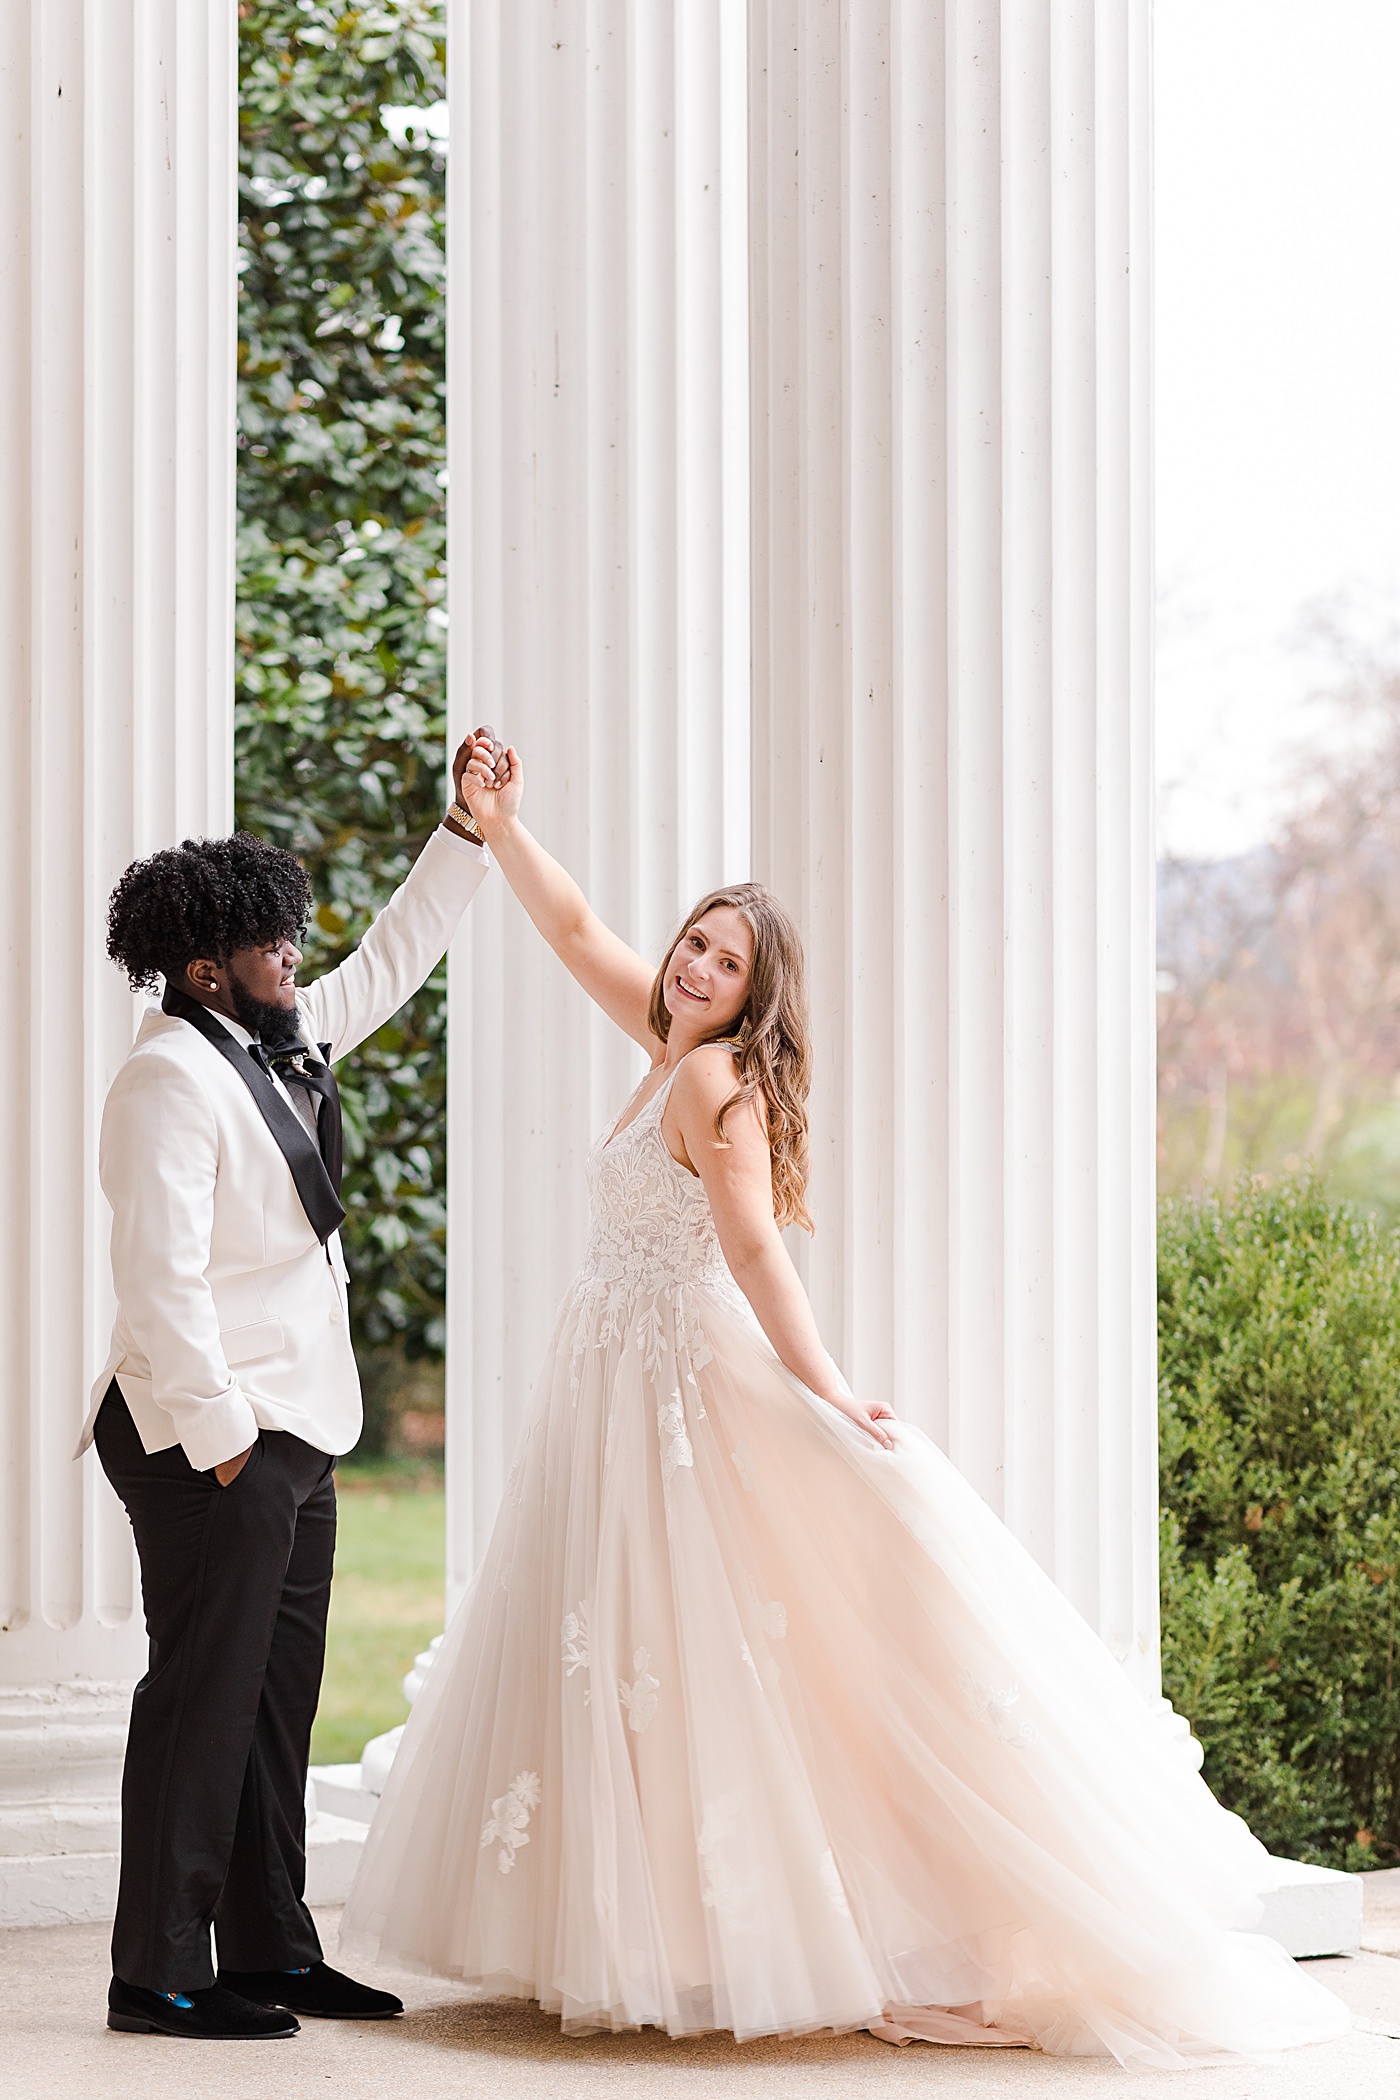 Groom twirling his bride for a portrait at their New Years Eve Roanoke, Virginia Wedding.